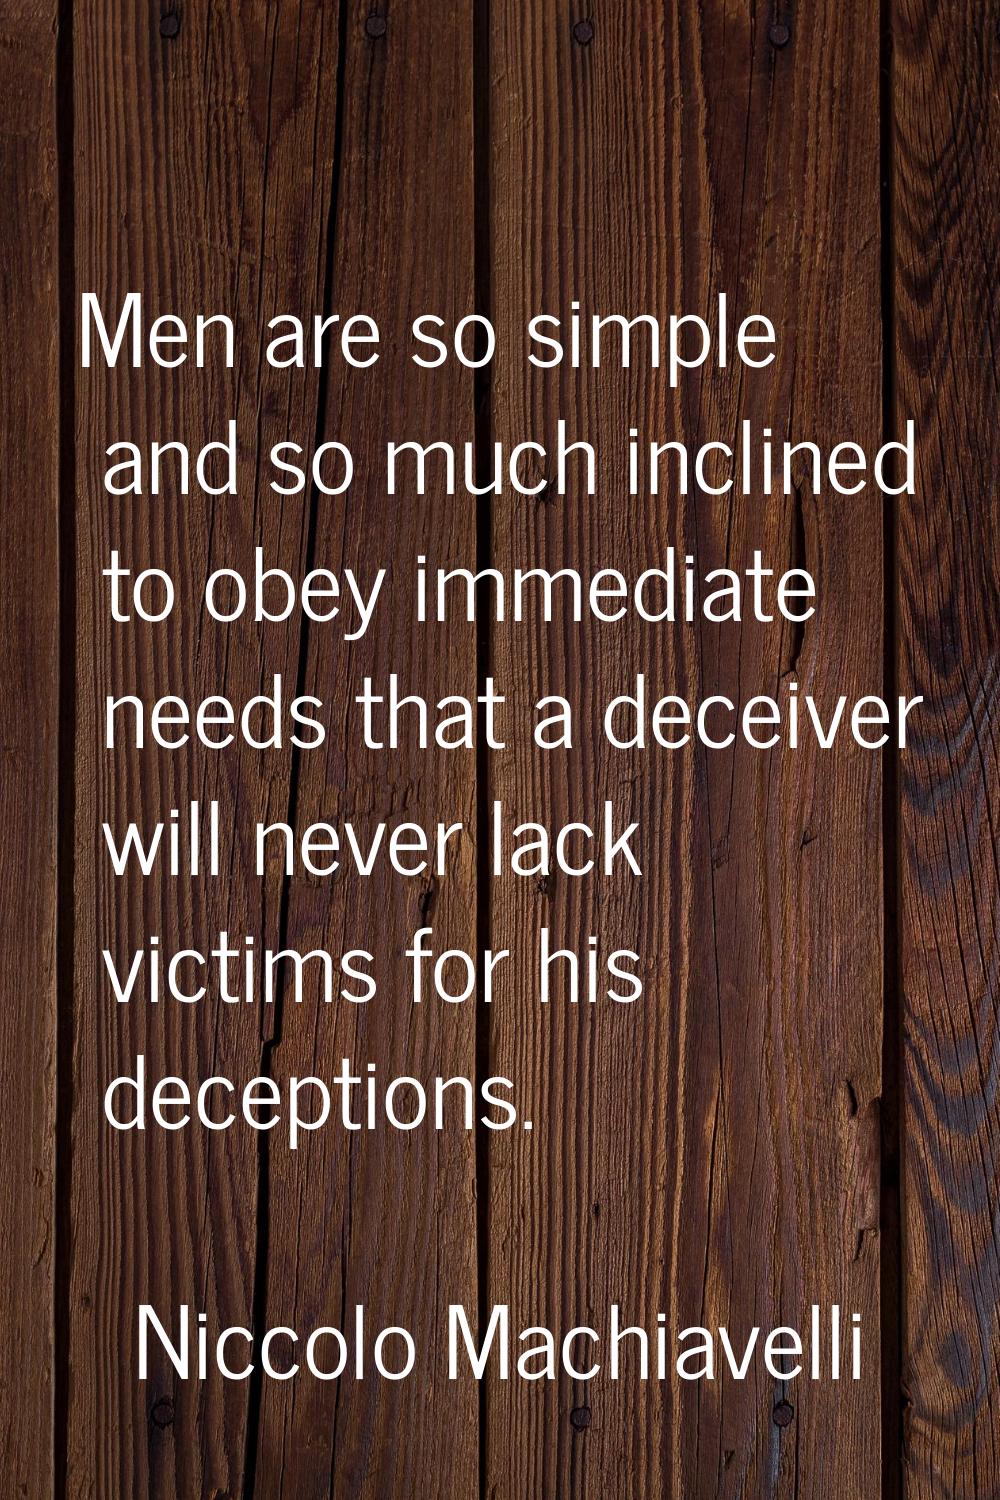 Men are so simple and so much inclined to obey immediate needs that a deceiver will never lack vict